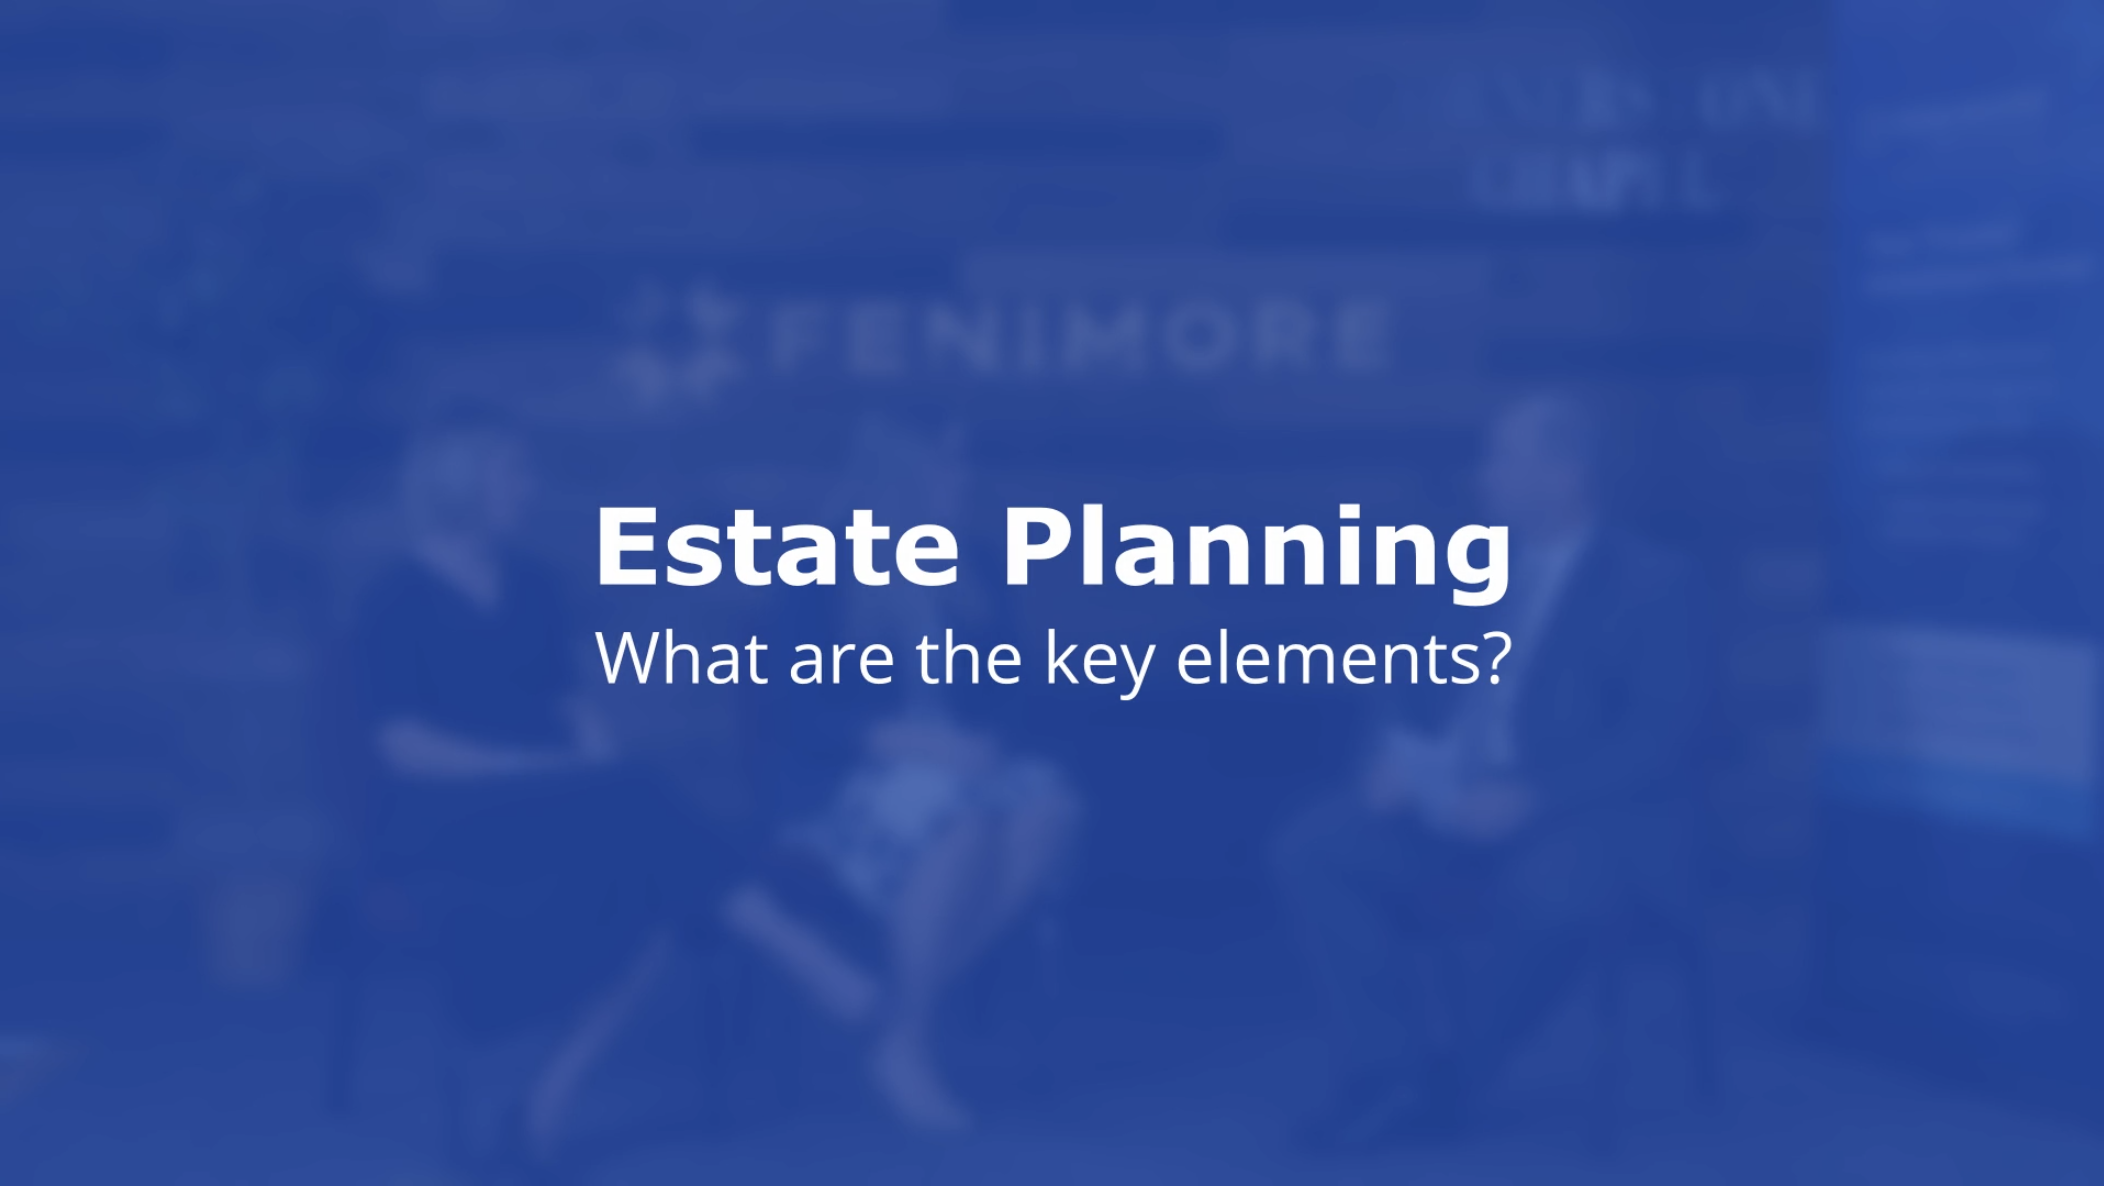 ESTATE PLANNING What are the key elements?